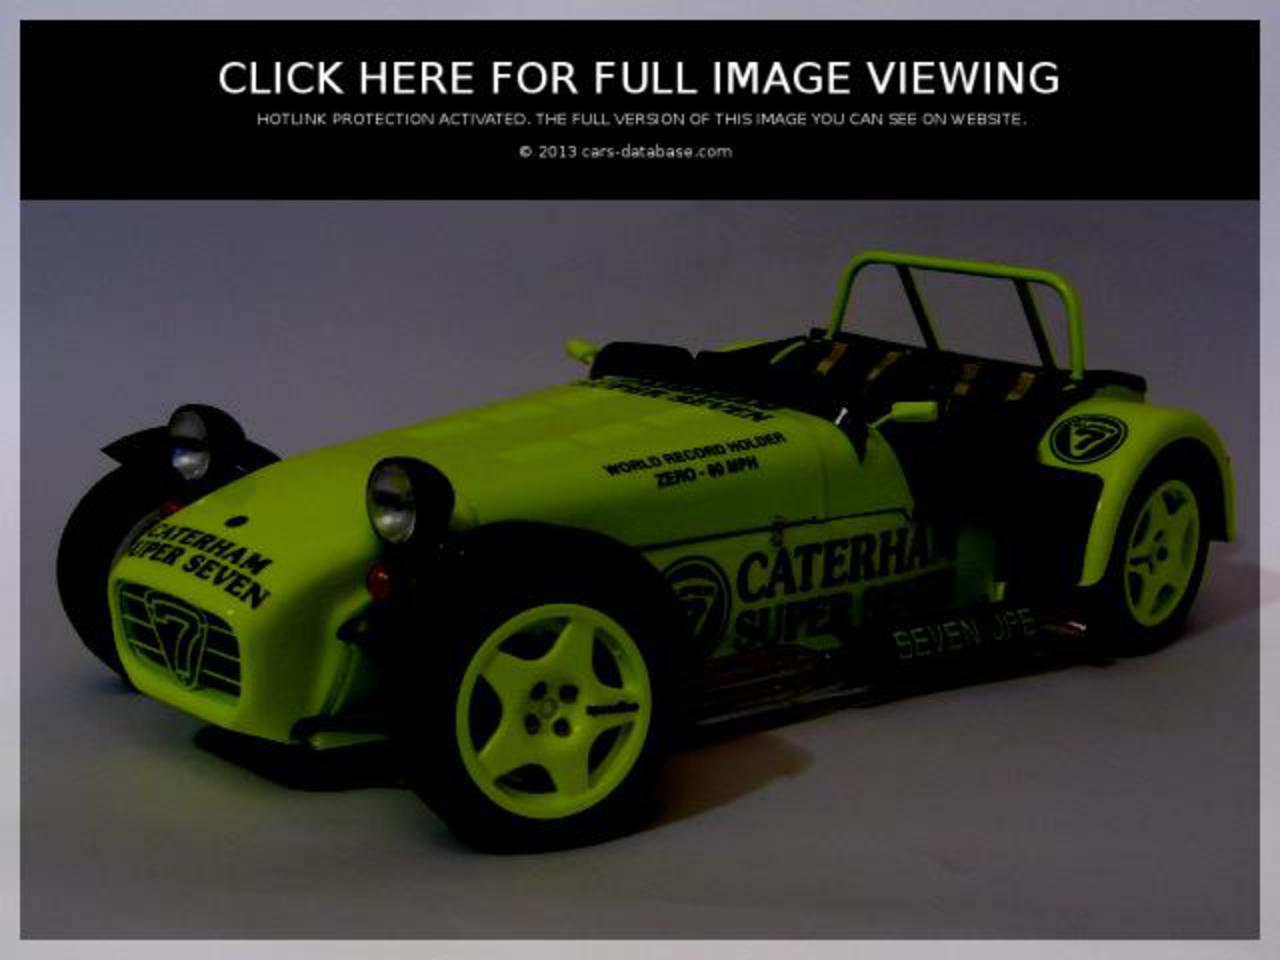 Caterham 7 JPE: Information about model, images gallery and ...